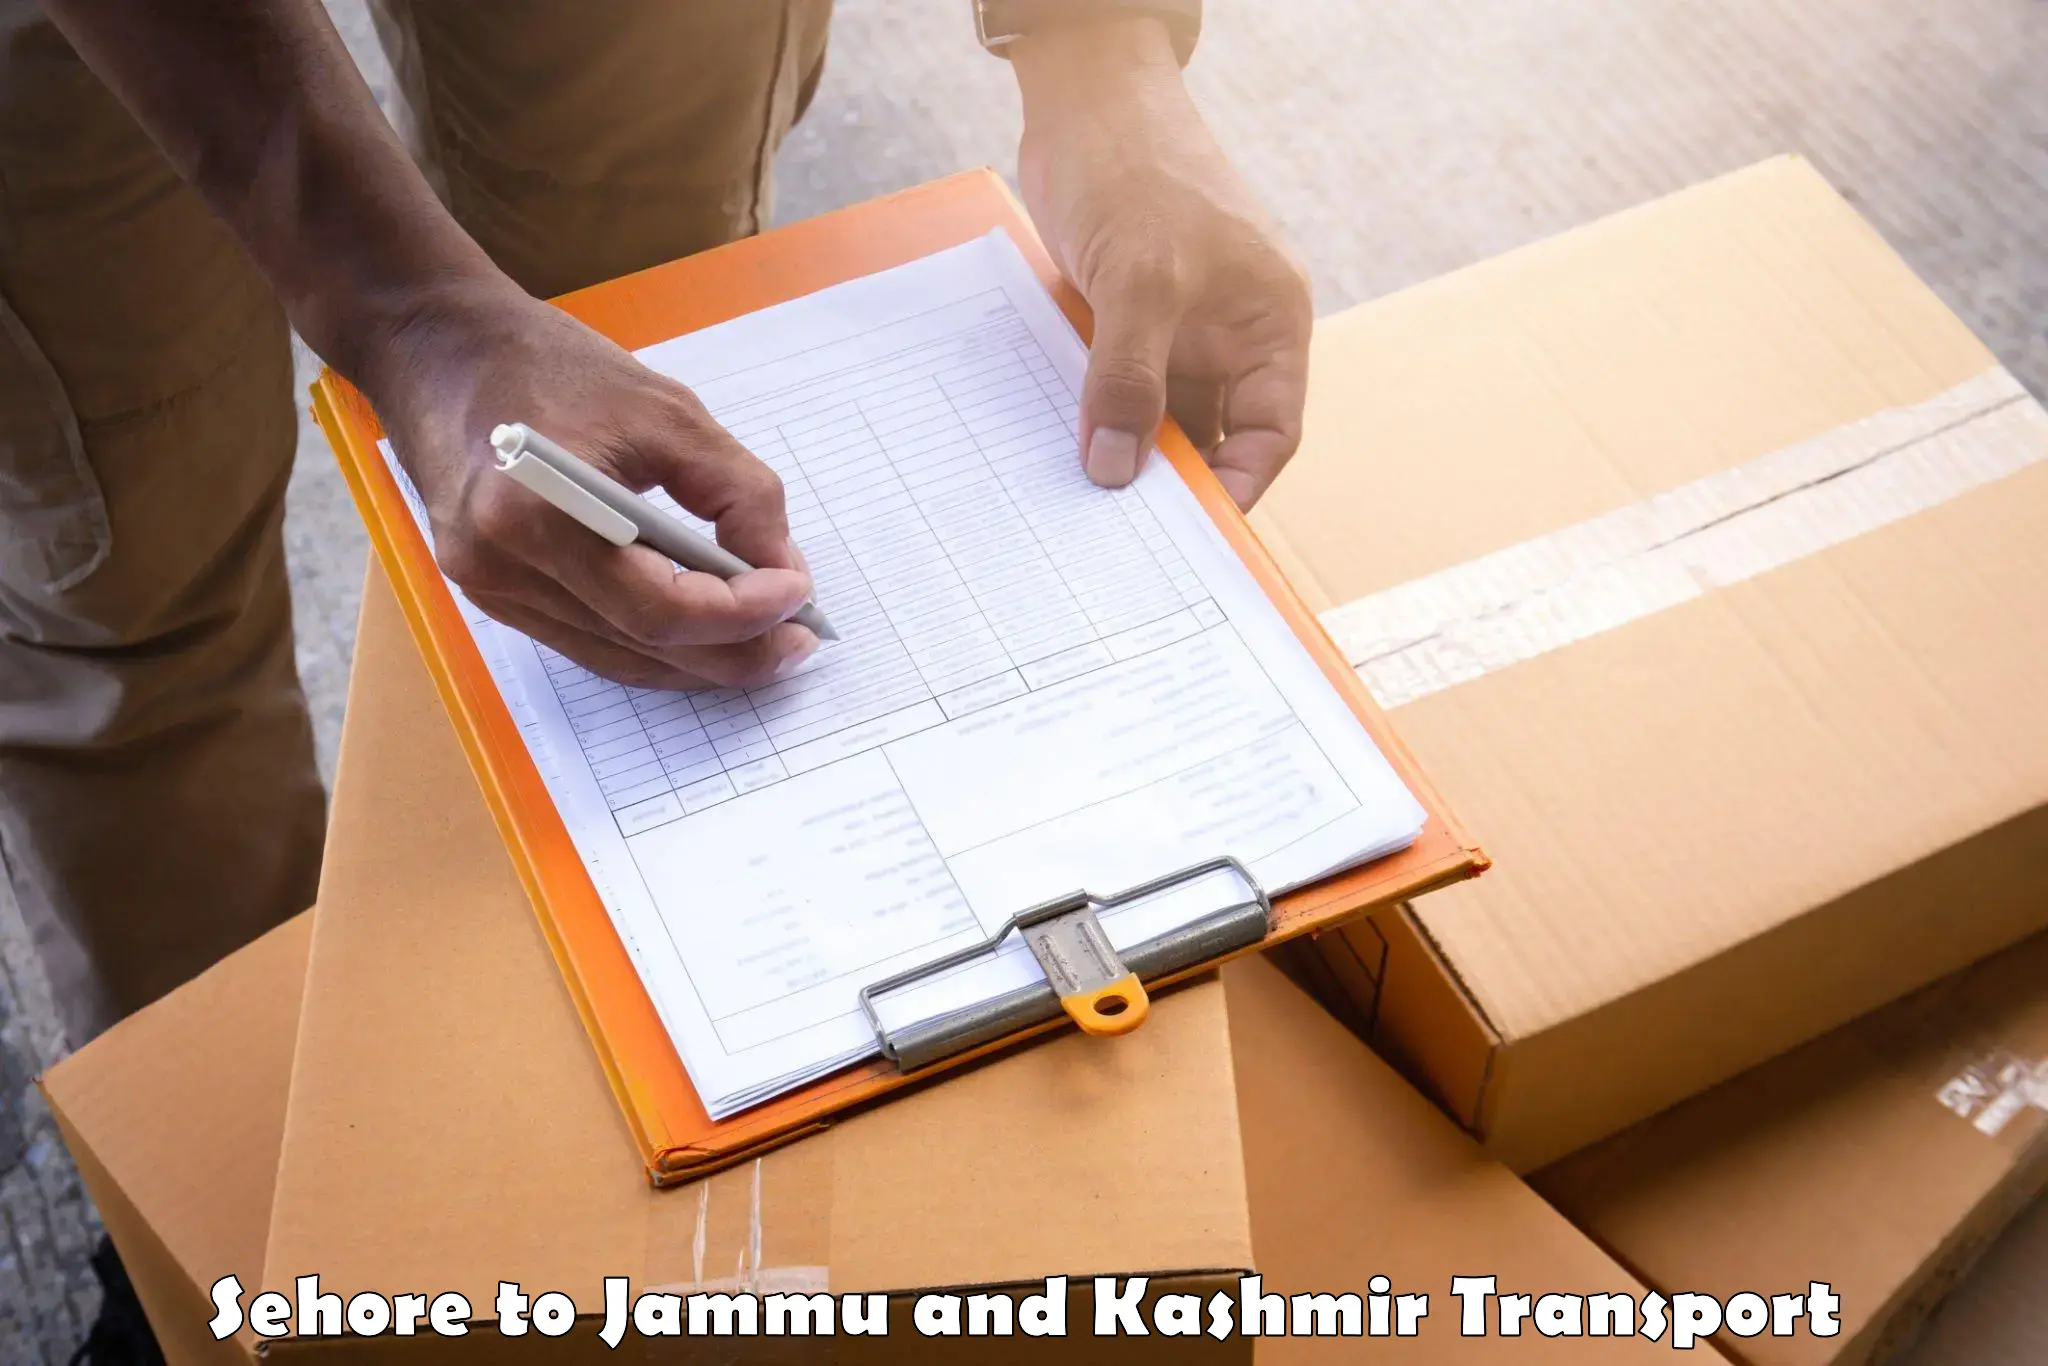 Cargo transport services Sehore to Jammu and Kashmir